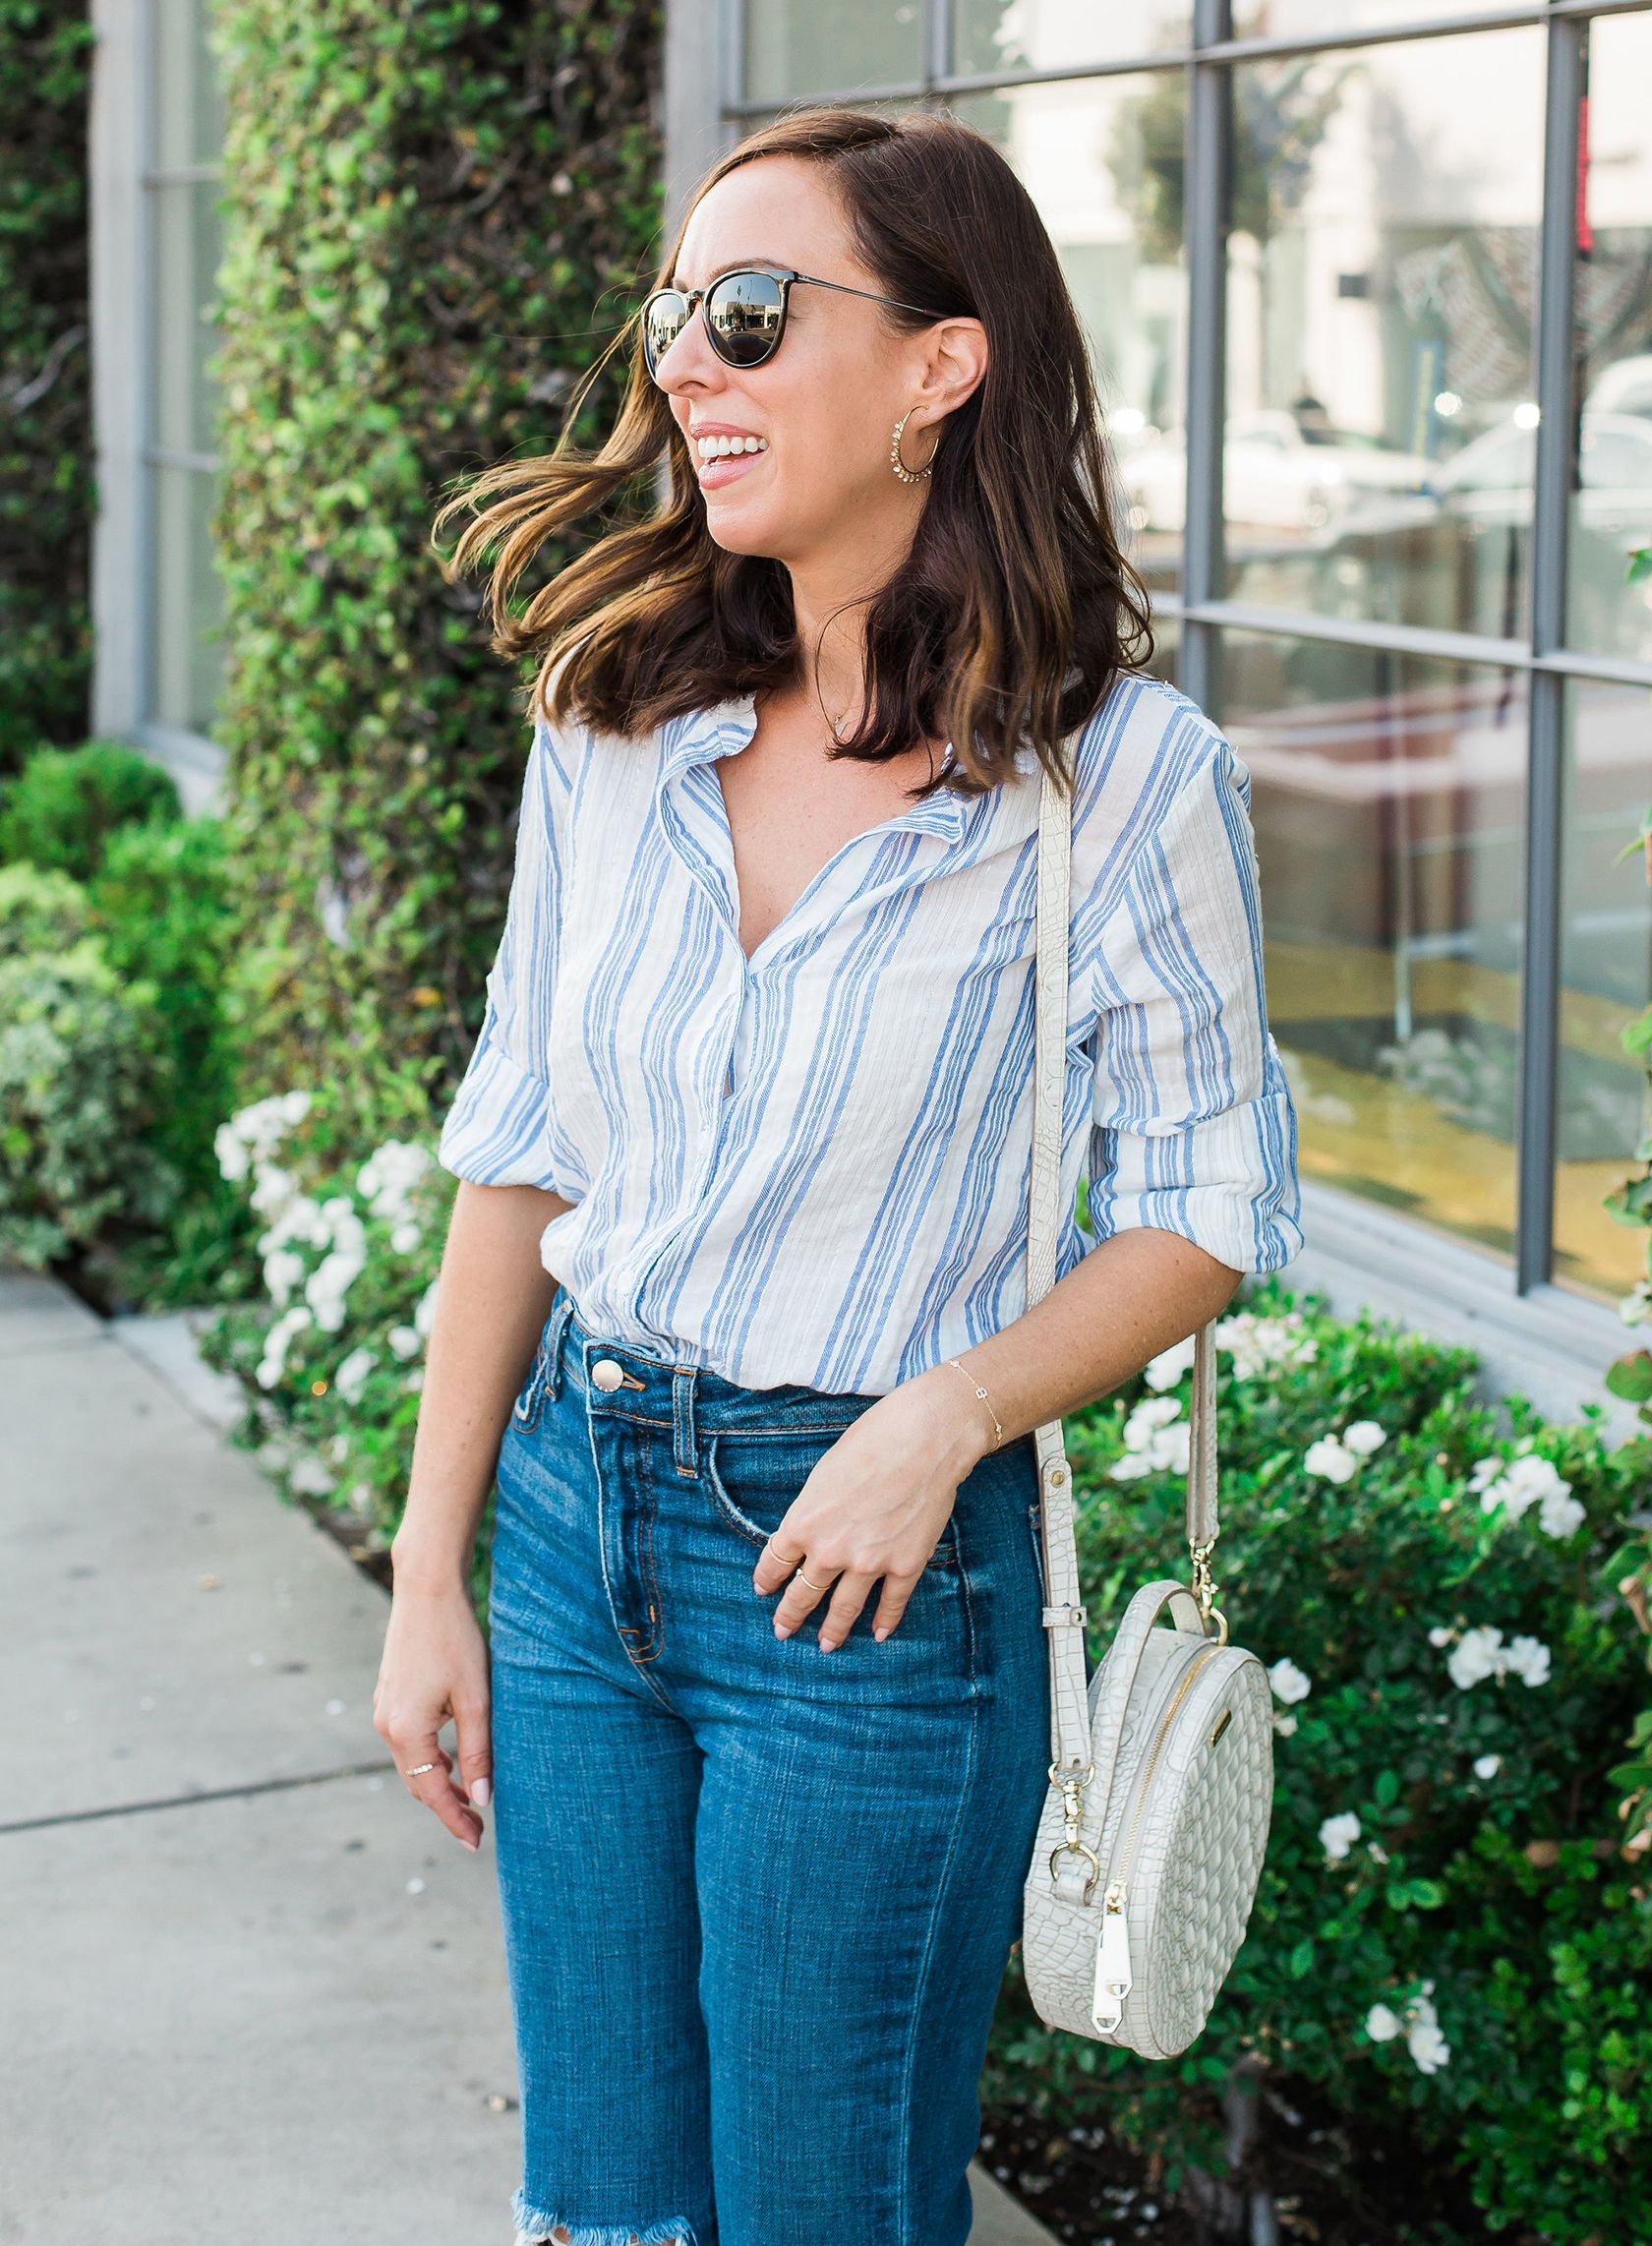 Styling Tips Every Petite Gal Should Remember